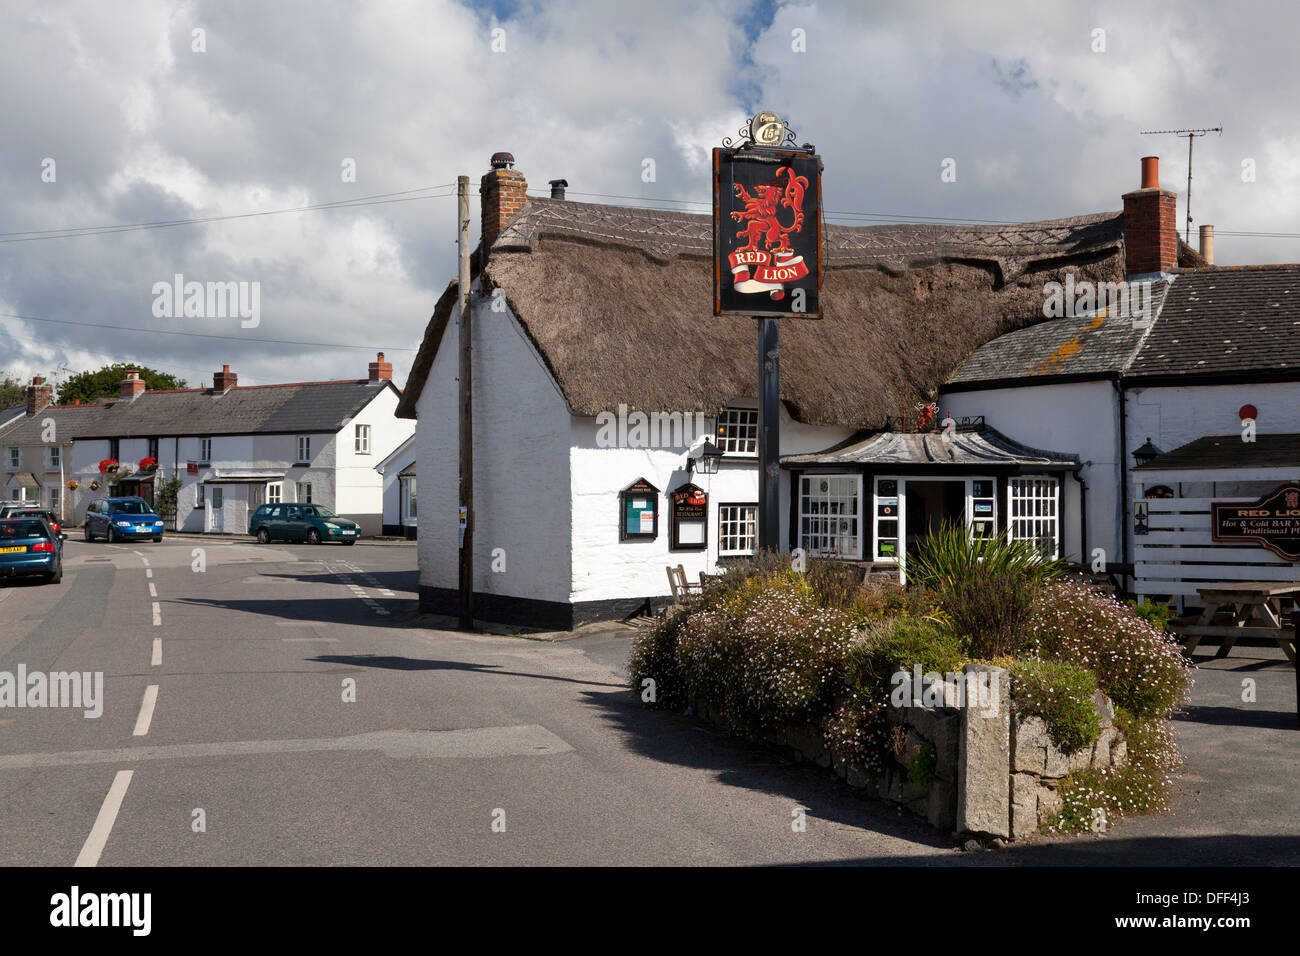 Centre Village et Red Lion Inn, Mawnan Smith, Cornwall Banque D'Images